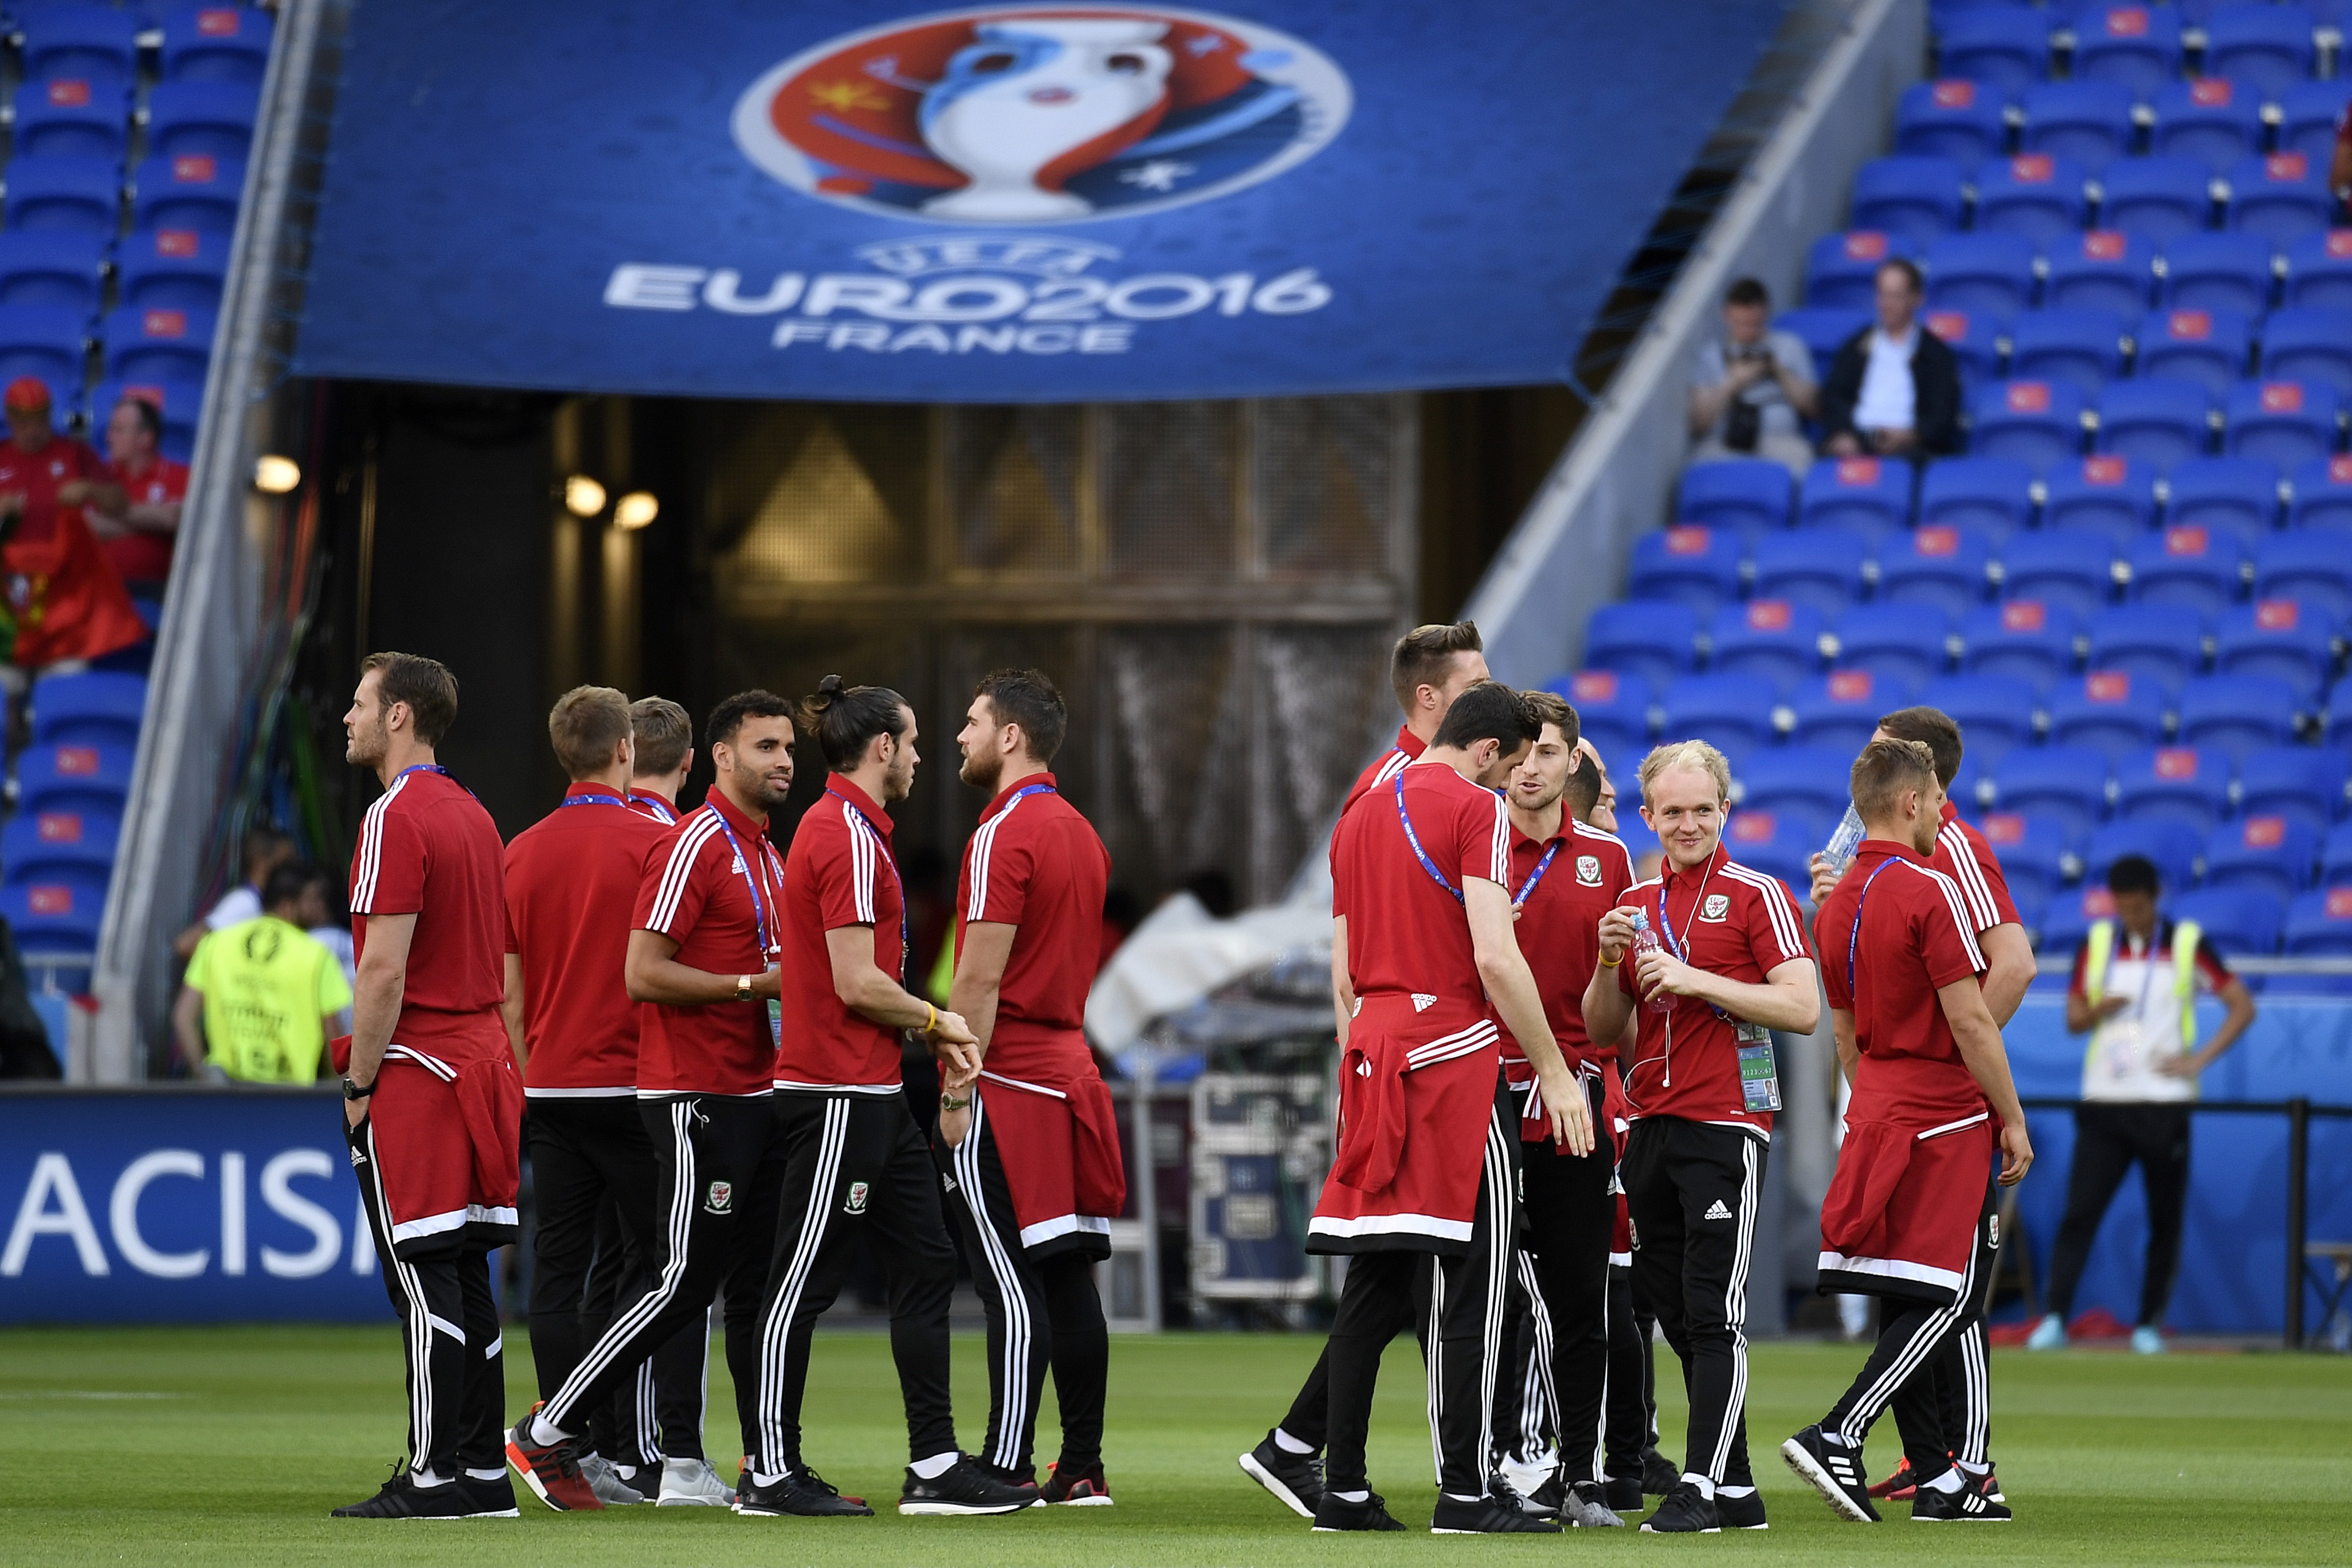 Wales teamates check the grounds prior to their upcoming match in the Euro 2016 semi-final football match between Portugal and Wales at the Parc Olympique Lyonnais stadium in Décines-Charpieu, near Lyon, on July 6, 2016.
 / AFP / PHILIPPE DESMAZES        (Photo credit should read PHILIPPE DESMAZES/AFP/Getty Images)